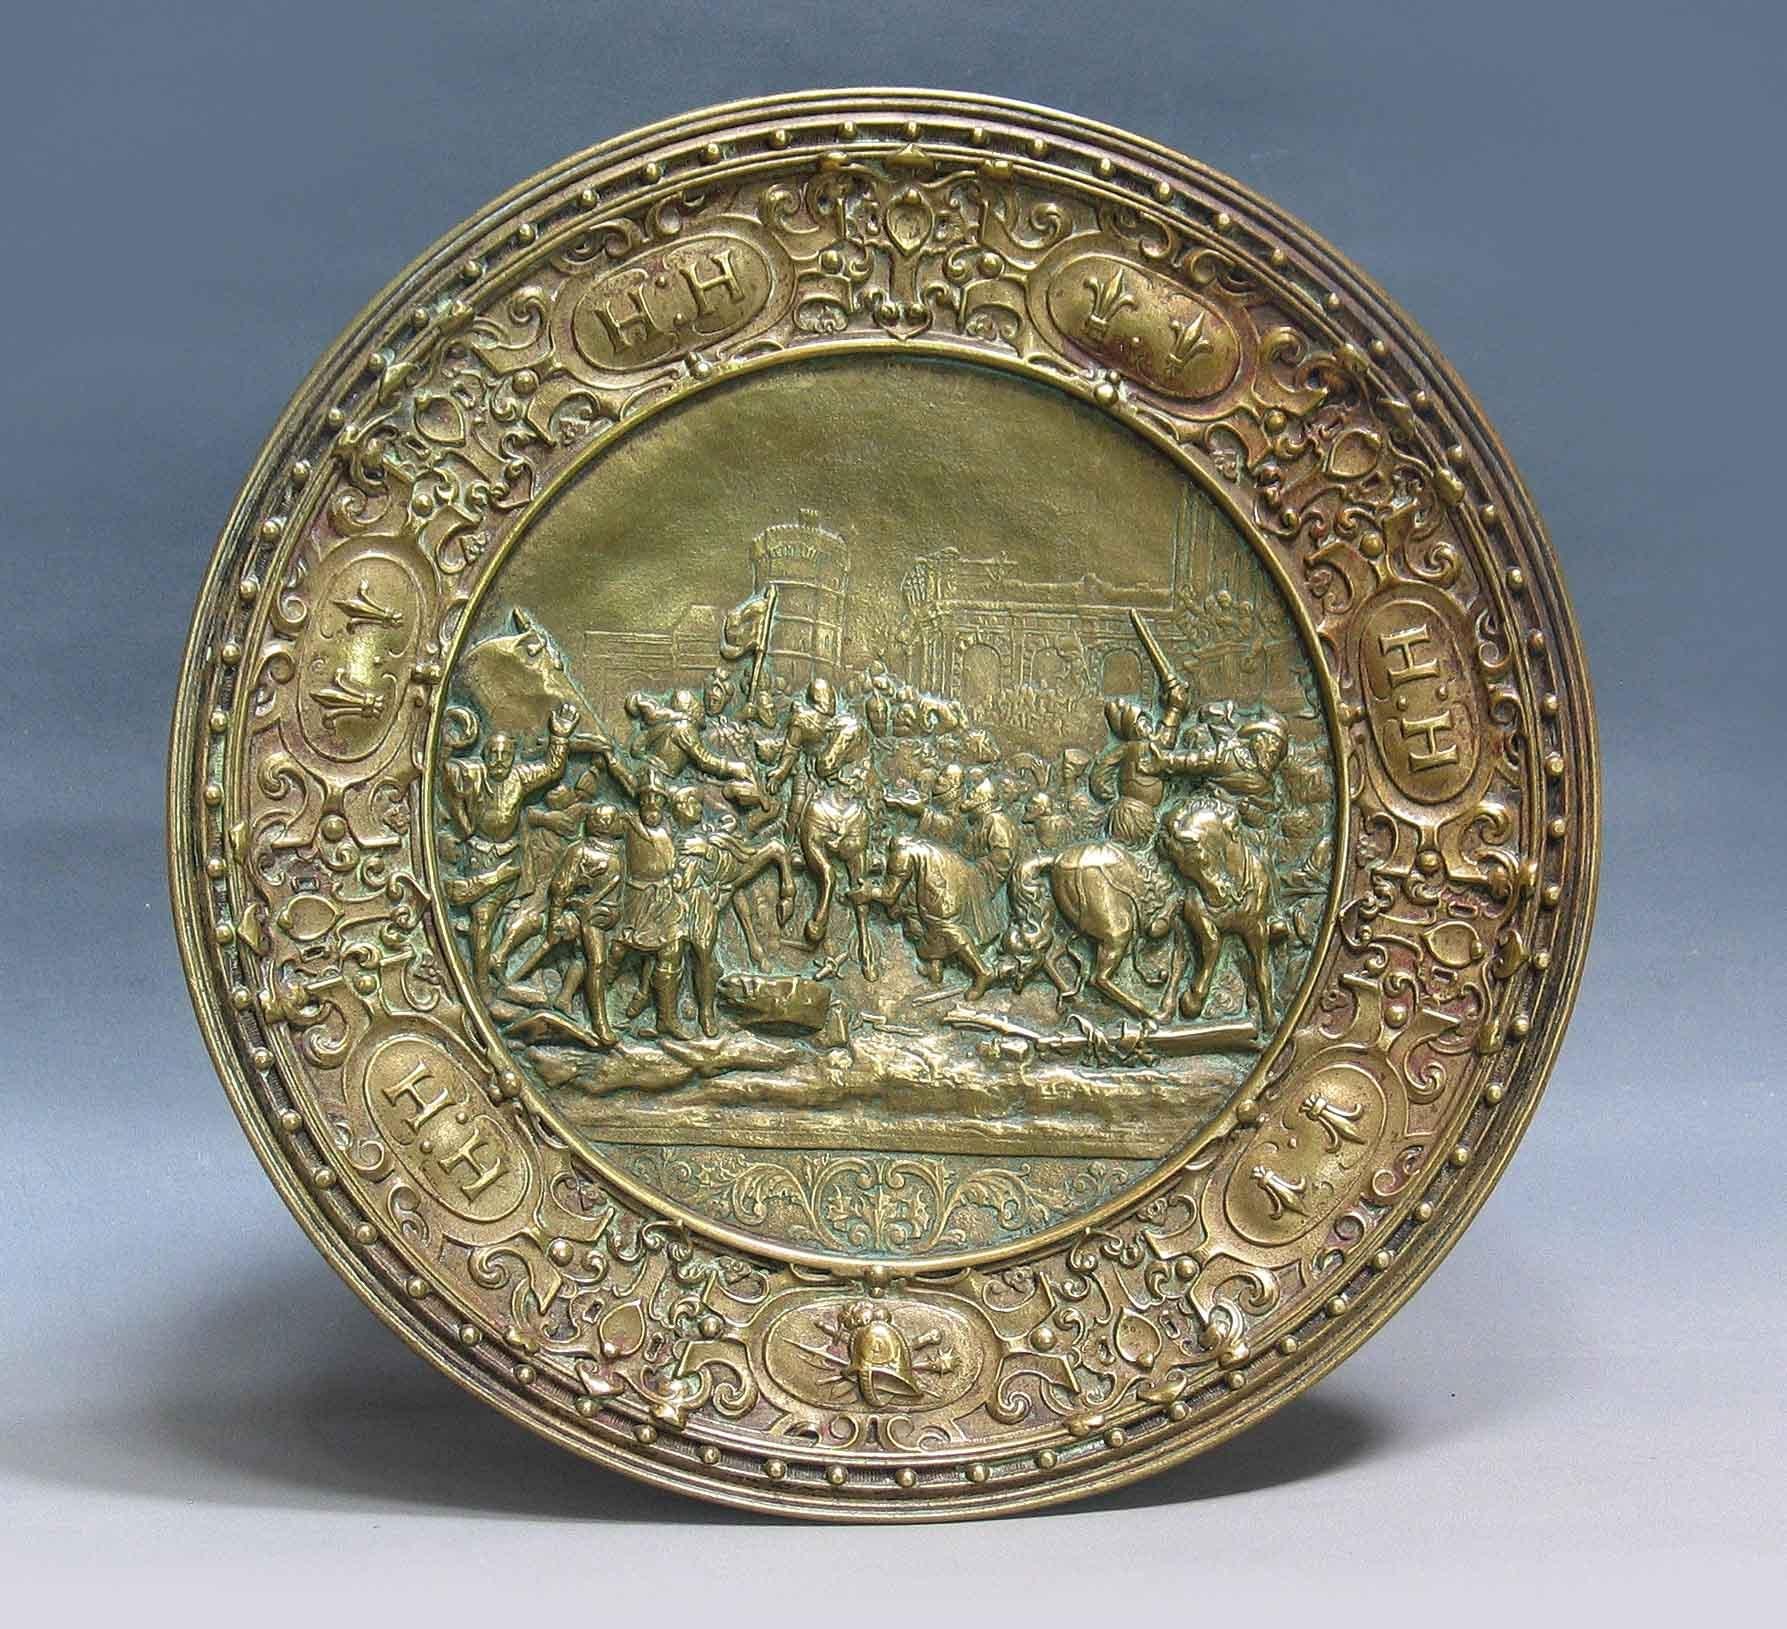 German Bronze Historicism Charger Depicting Entry of Henry IV into Paris in 1594 For Sale 3